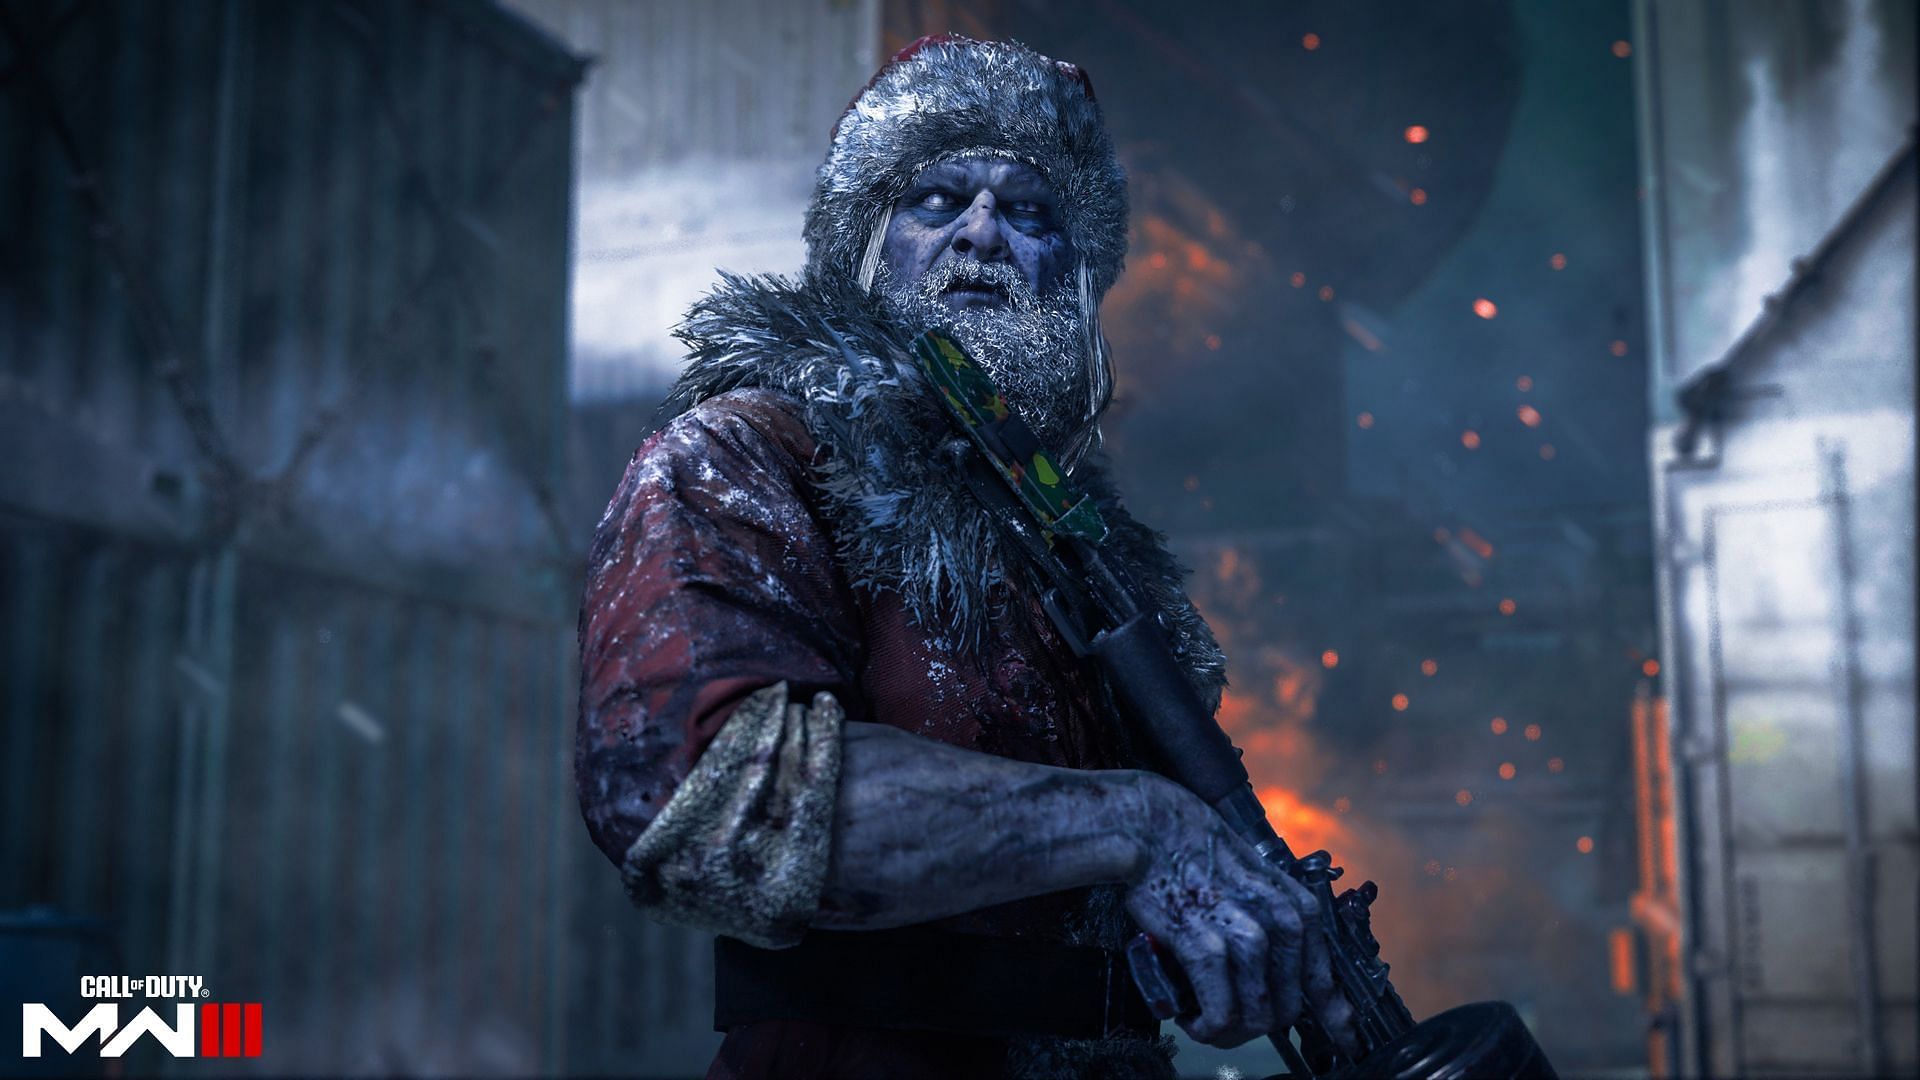 Call of Duty is adding a zombie Santa to celebrate the Holidays (Image via Activision)